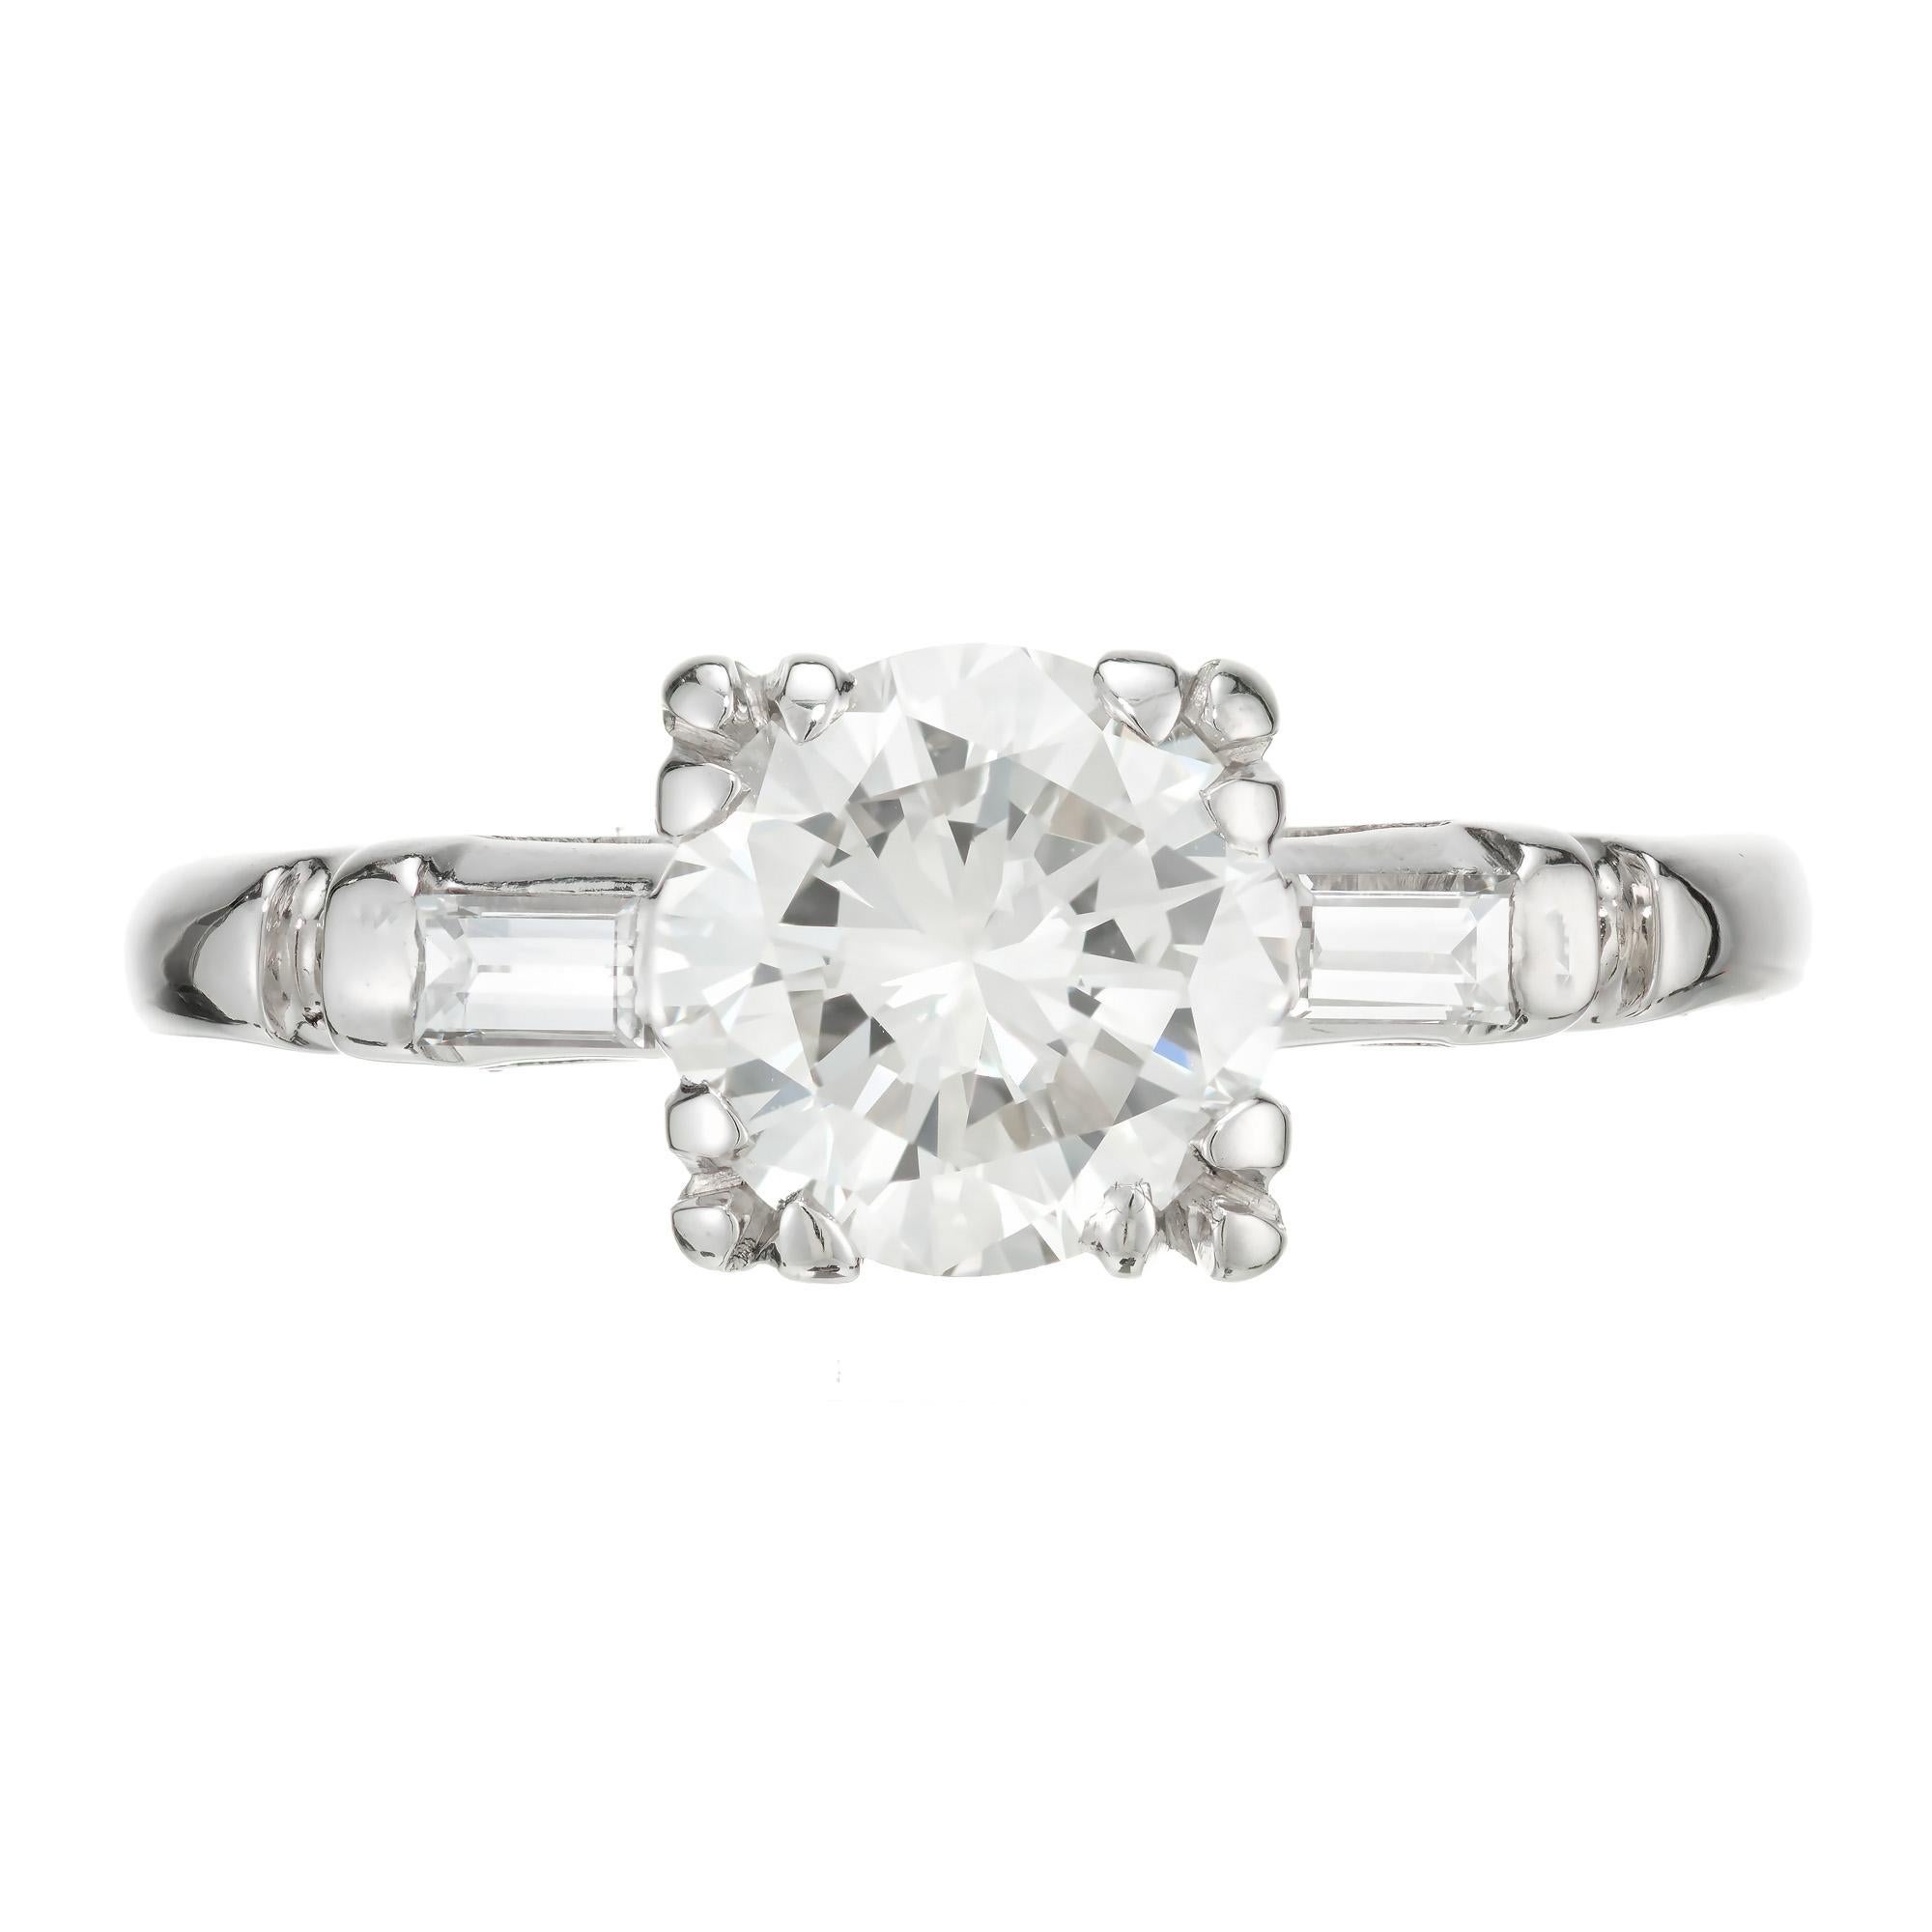 1940's vintage diamond engagement ring. EGL certified round brilliant cut center diamond. In a palladium three-stone setting with 2 straight baguette diamonds. The diamond was not removed for grading. During World War II, platinum went into the war